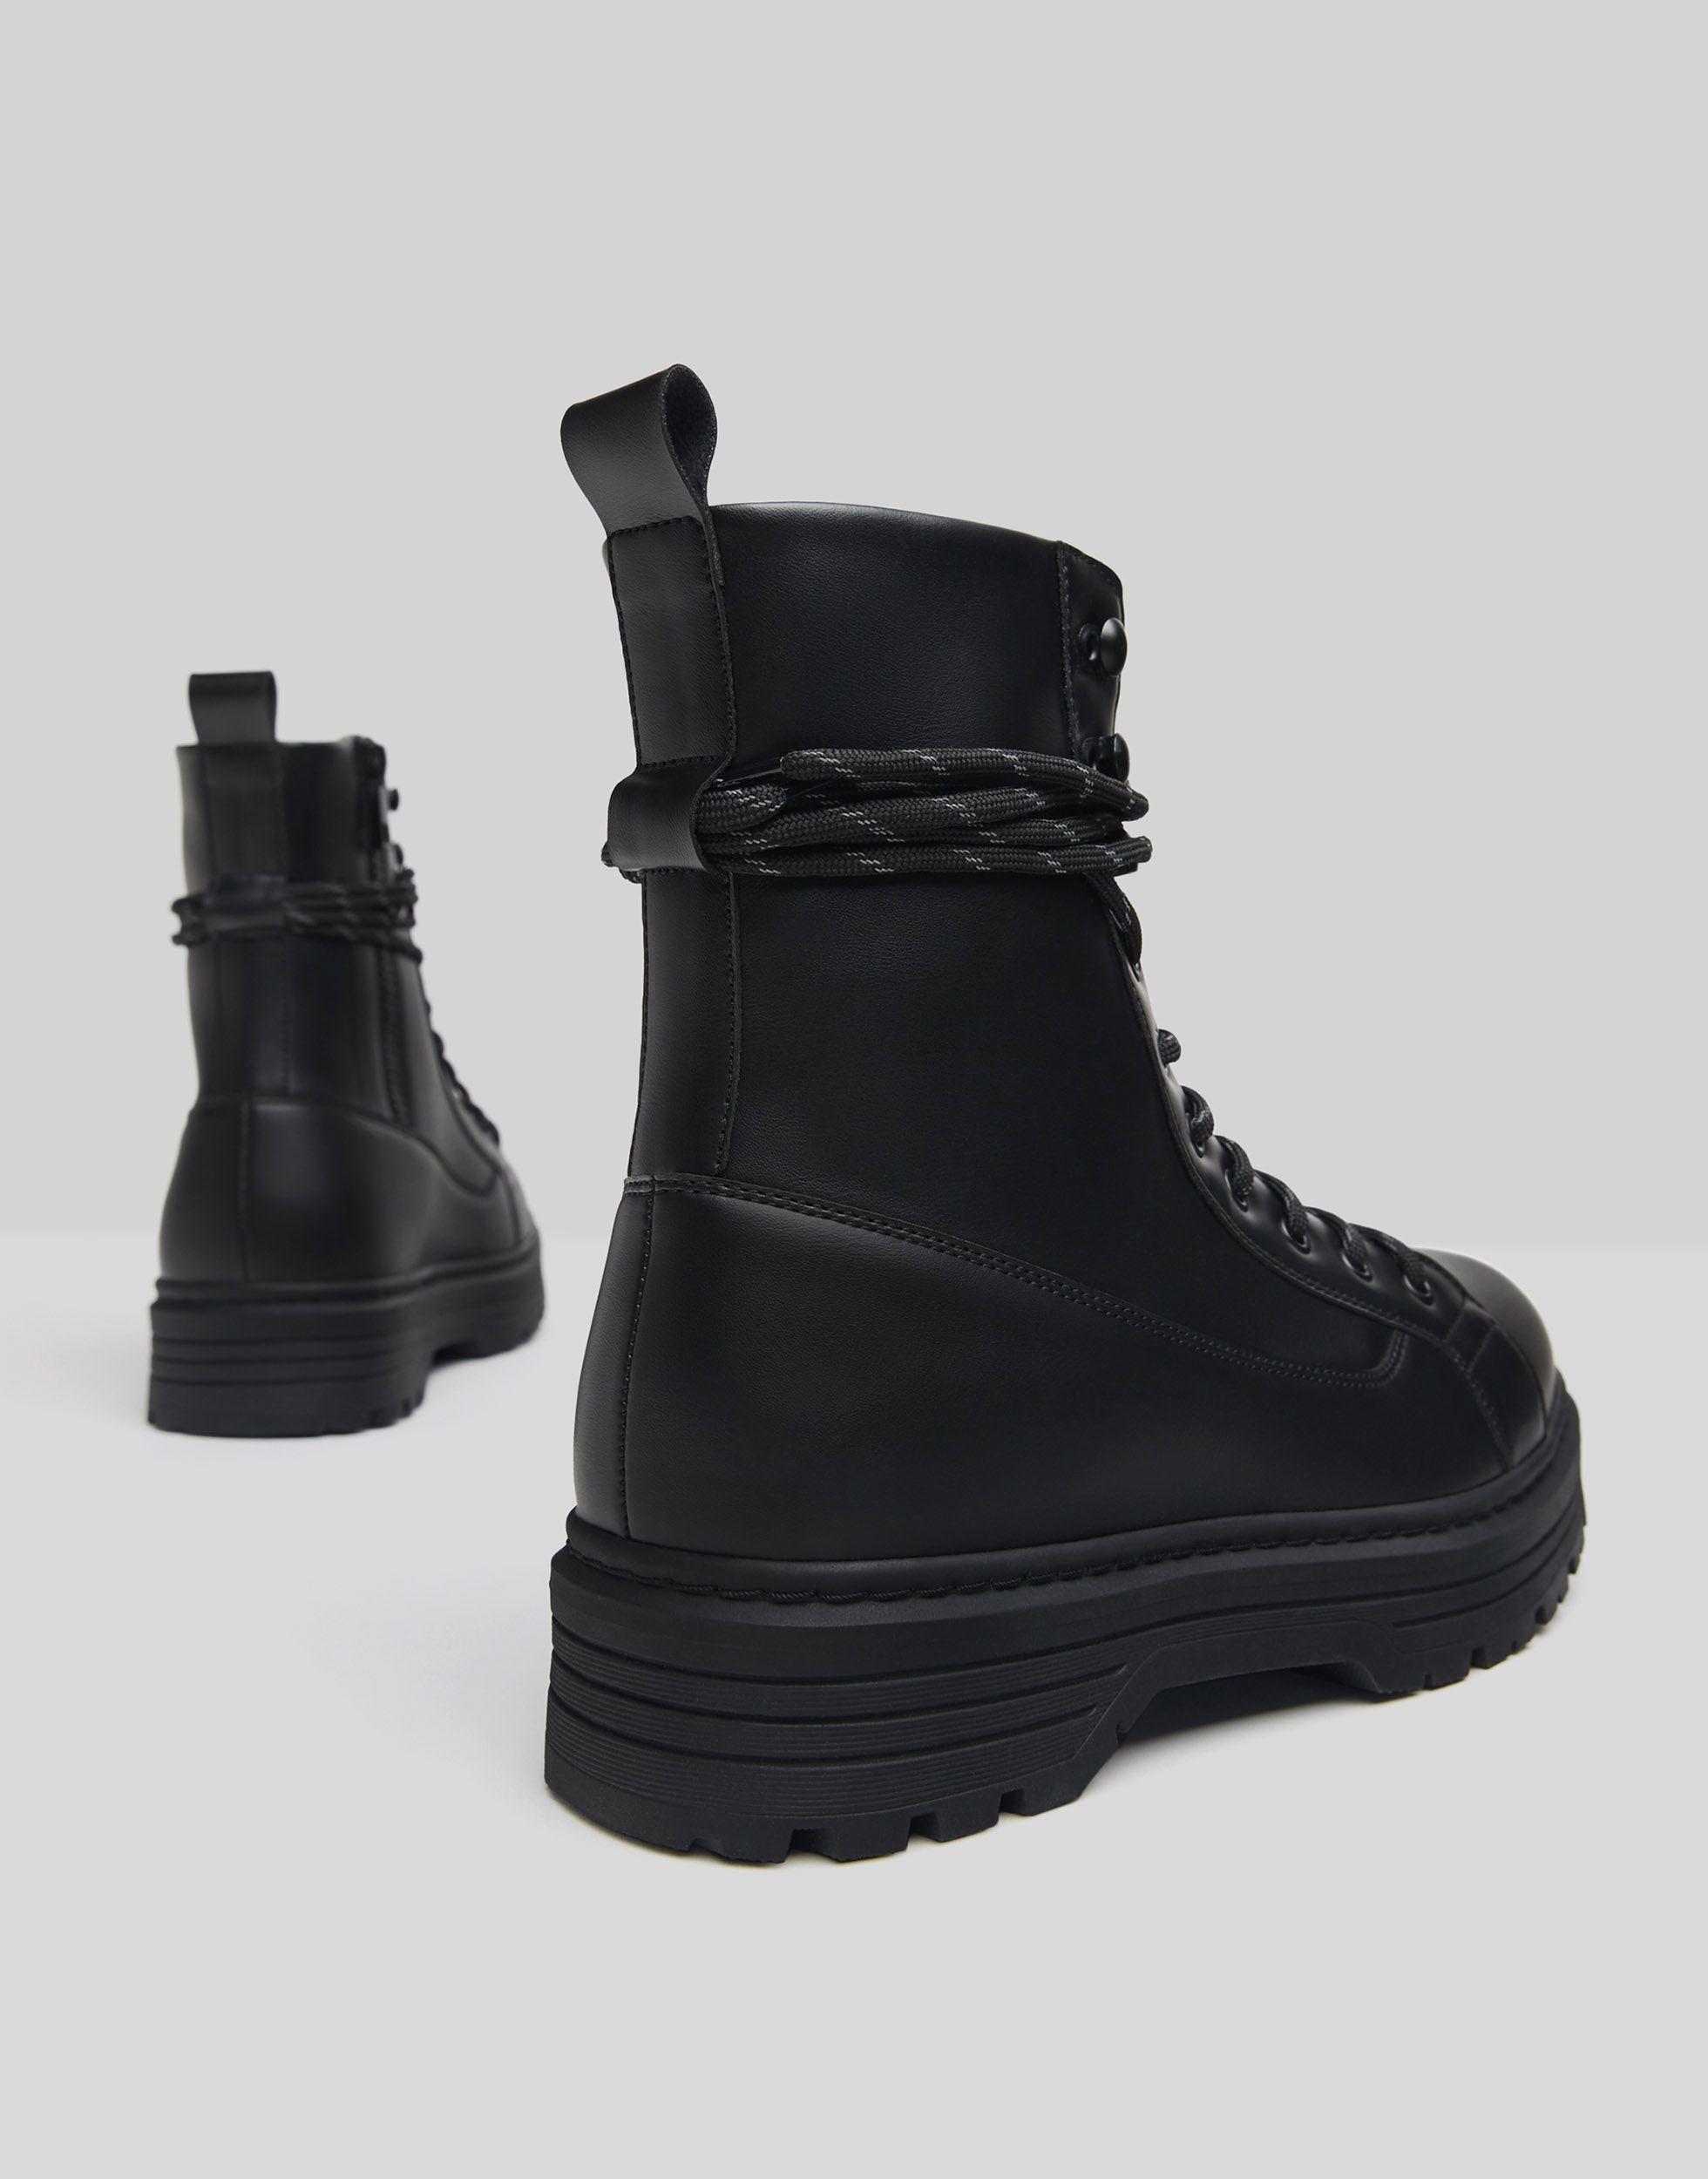 Bershka Lace Up Boots in Black for Men - Lyst